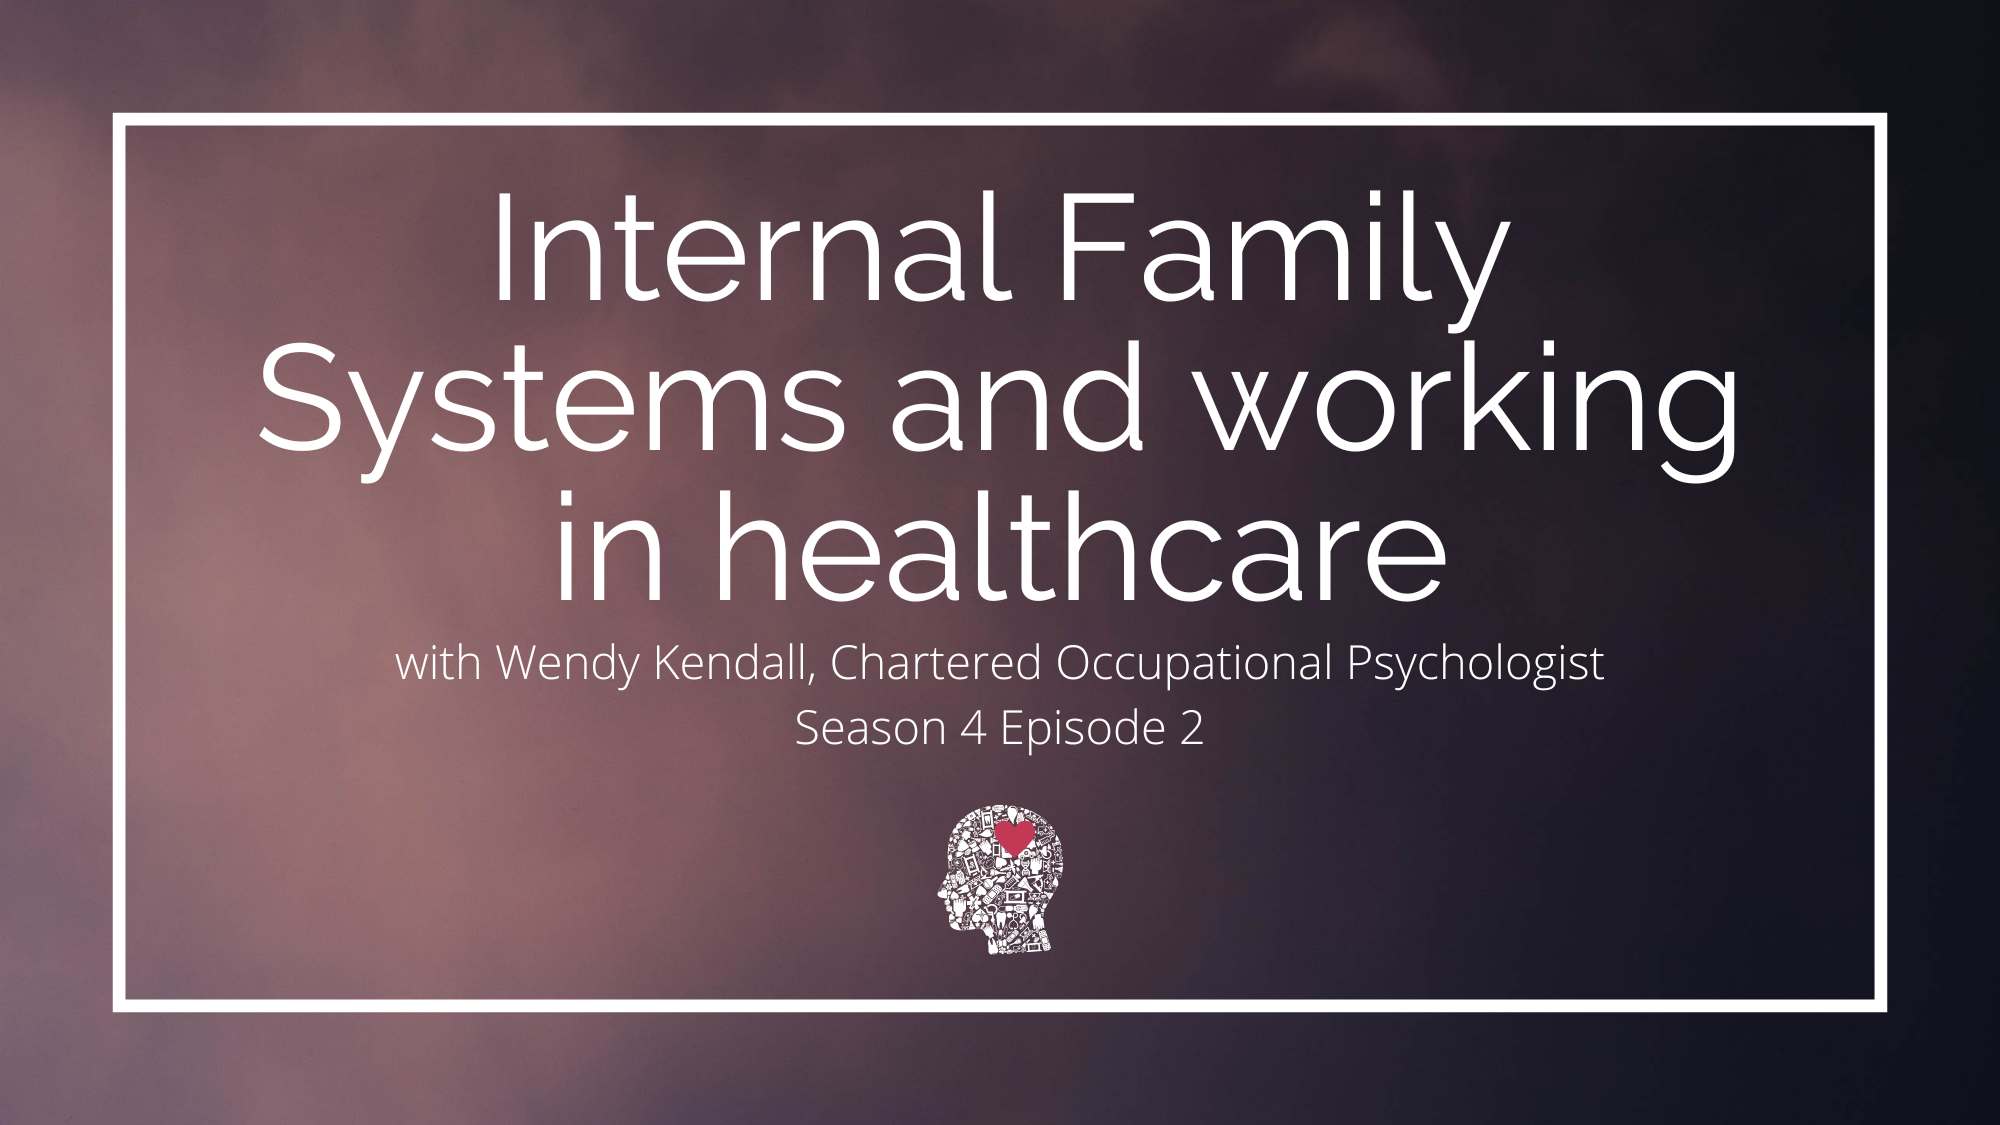 Internal Family Systems and working in healthcare with Wendy Kendall - When Work Hurts podcast